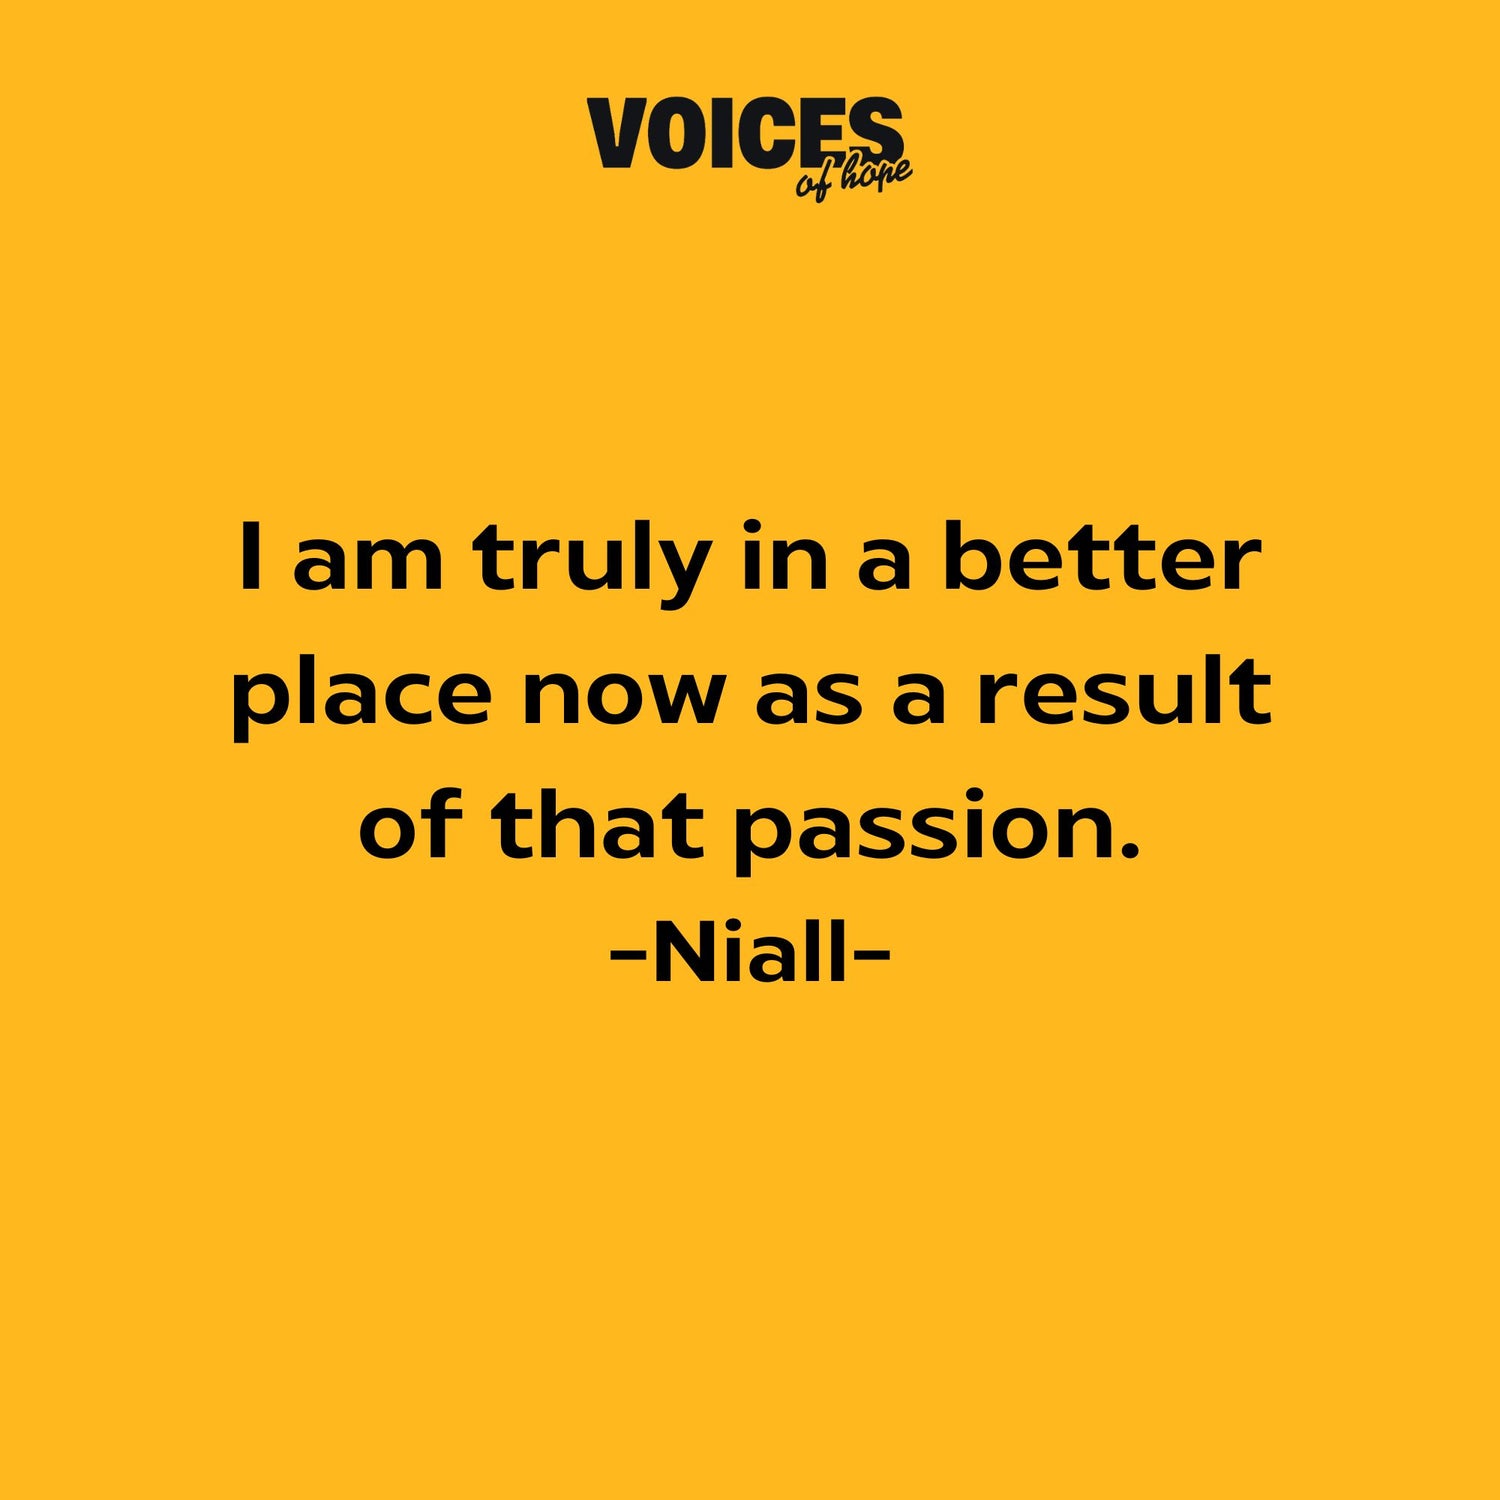 Yellow background with black writing that reads: "I am truly in a better place now as a result of that passion. Niall."